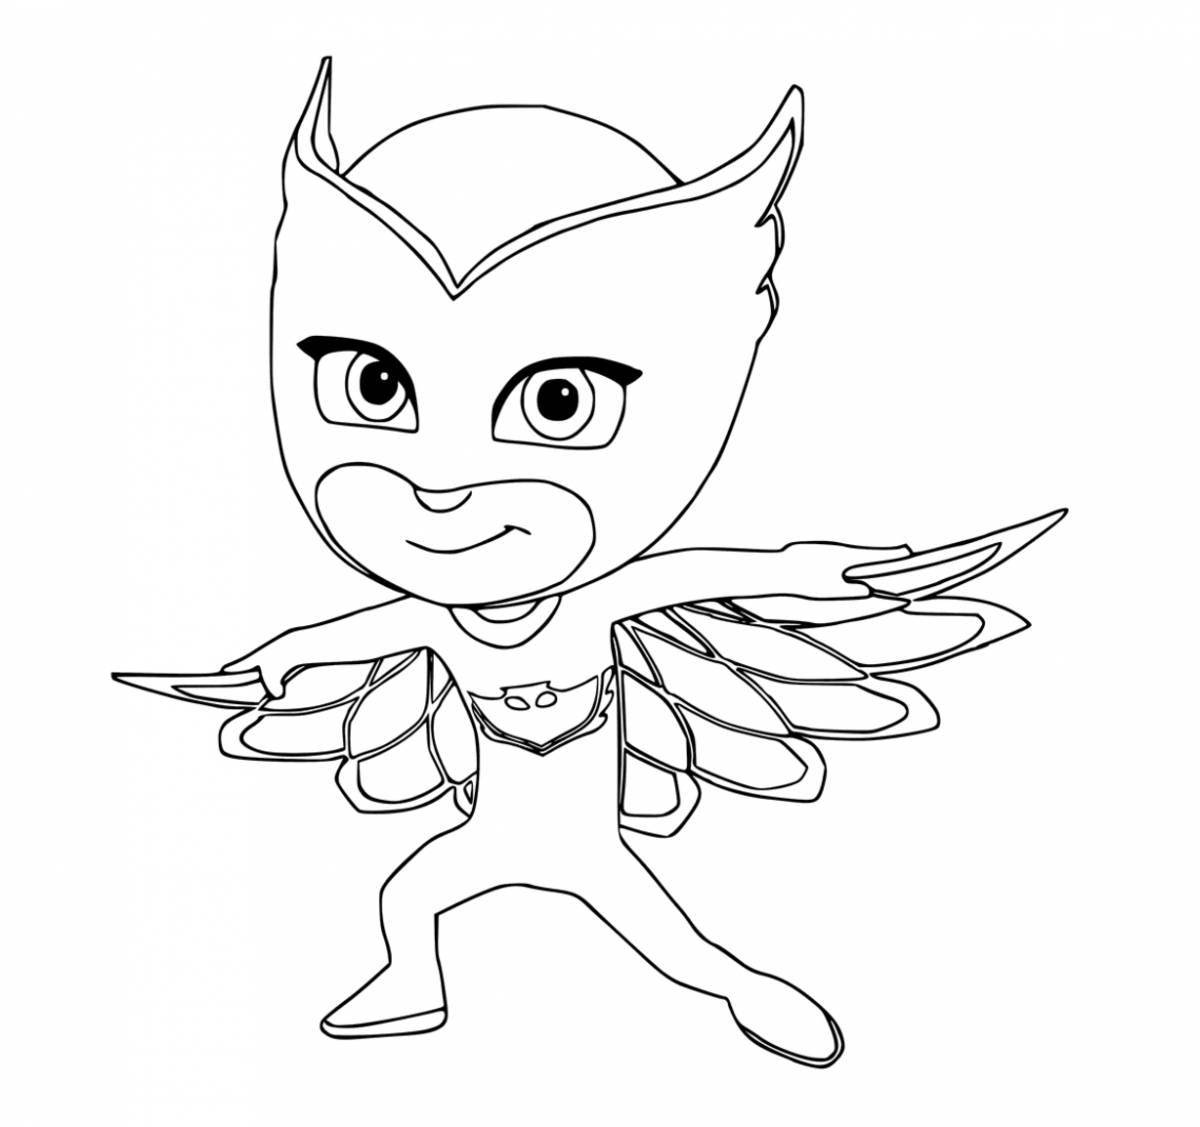 Coloring page adorable masked characters